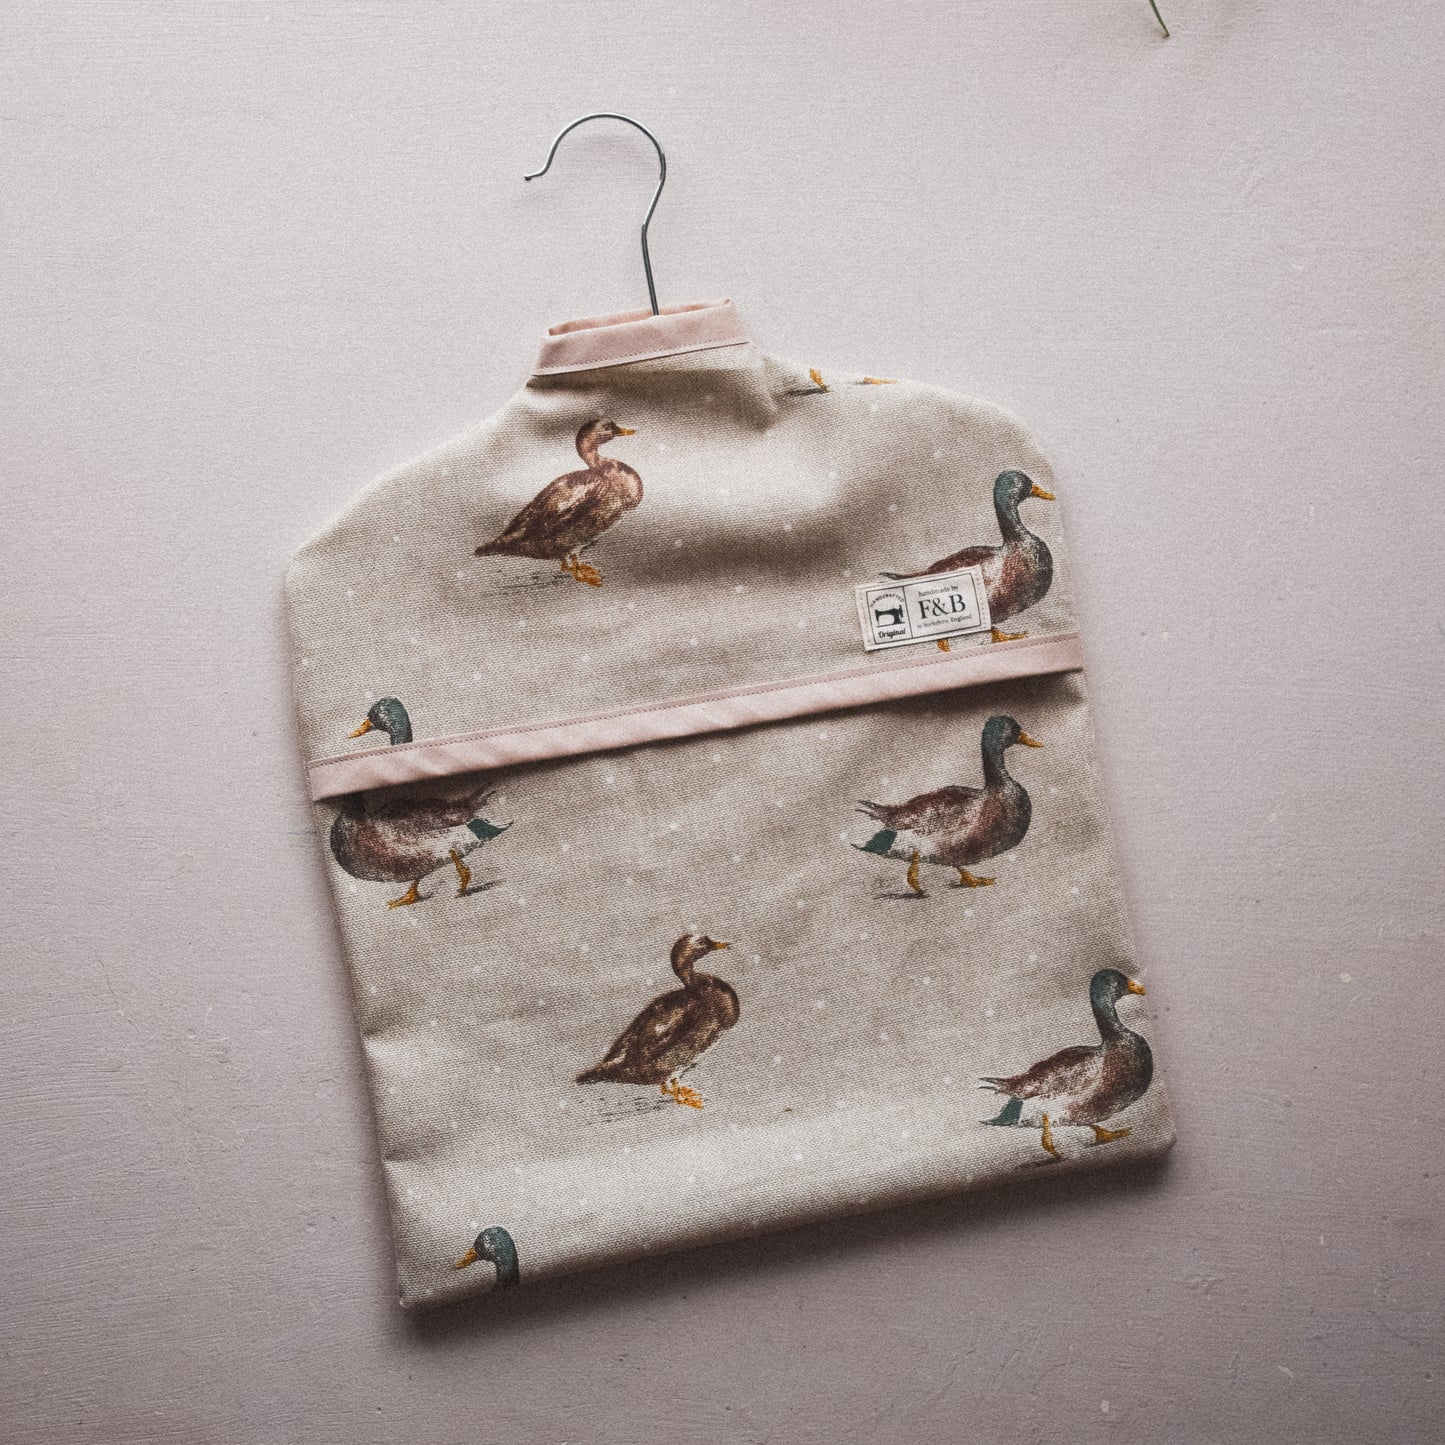 Duck Print Peg Basket - Handmade in Yorkshire by F&B - Useful Country Home Decor Items